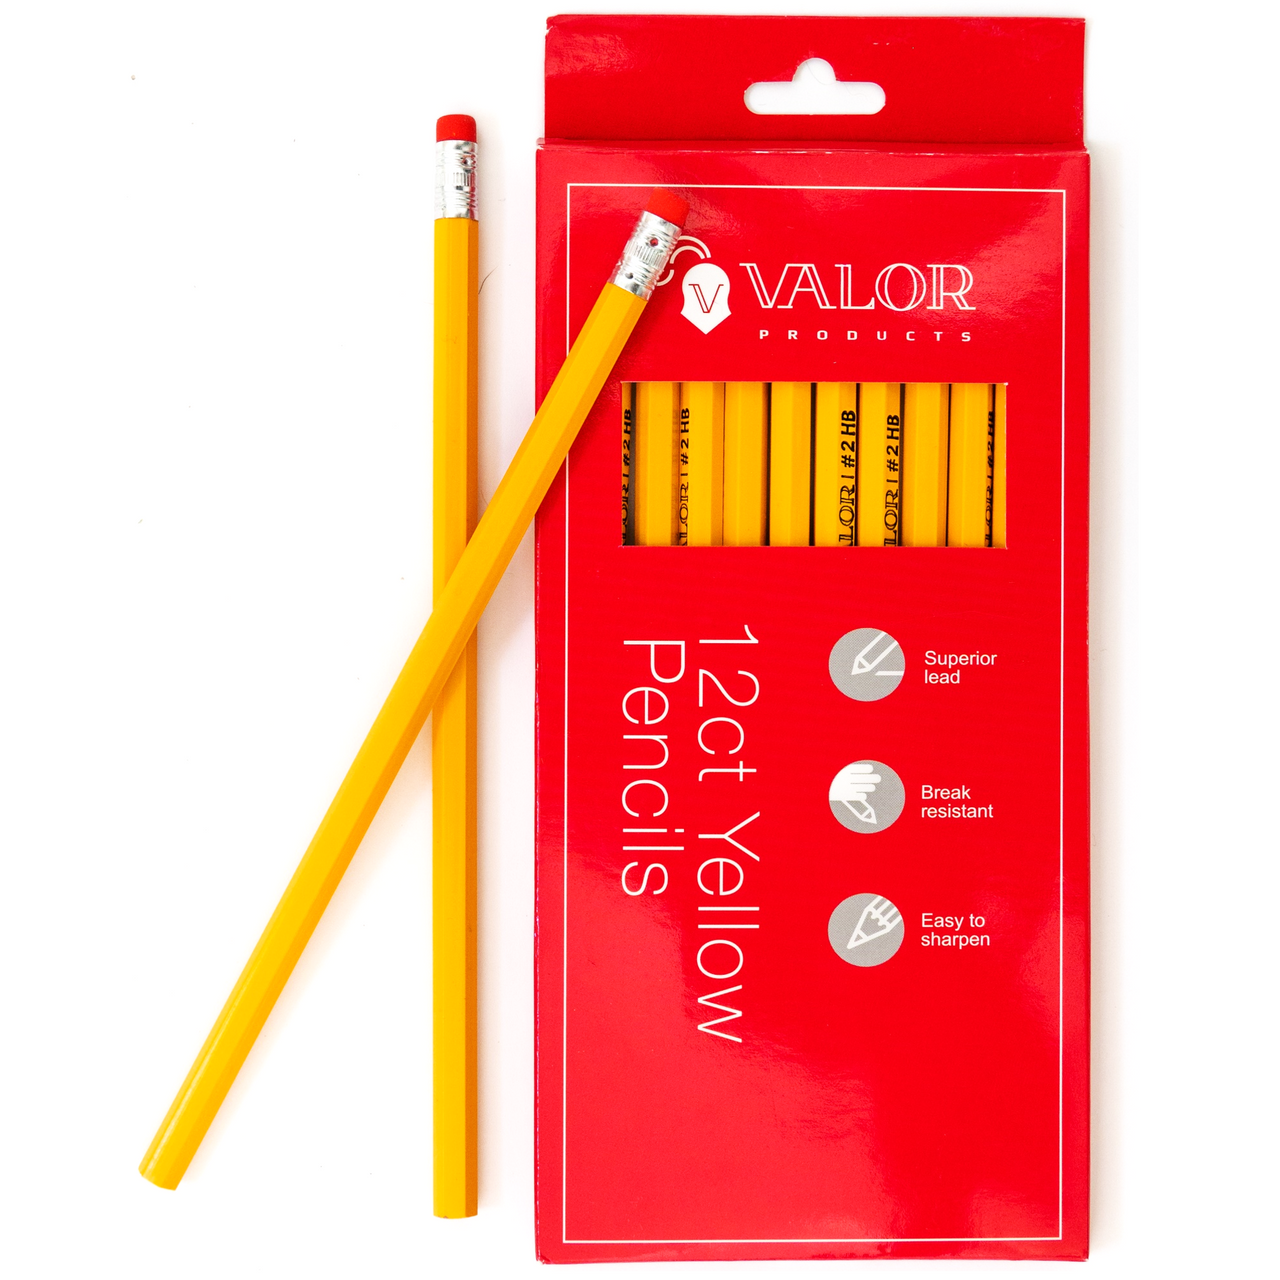 yellow pencils png